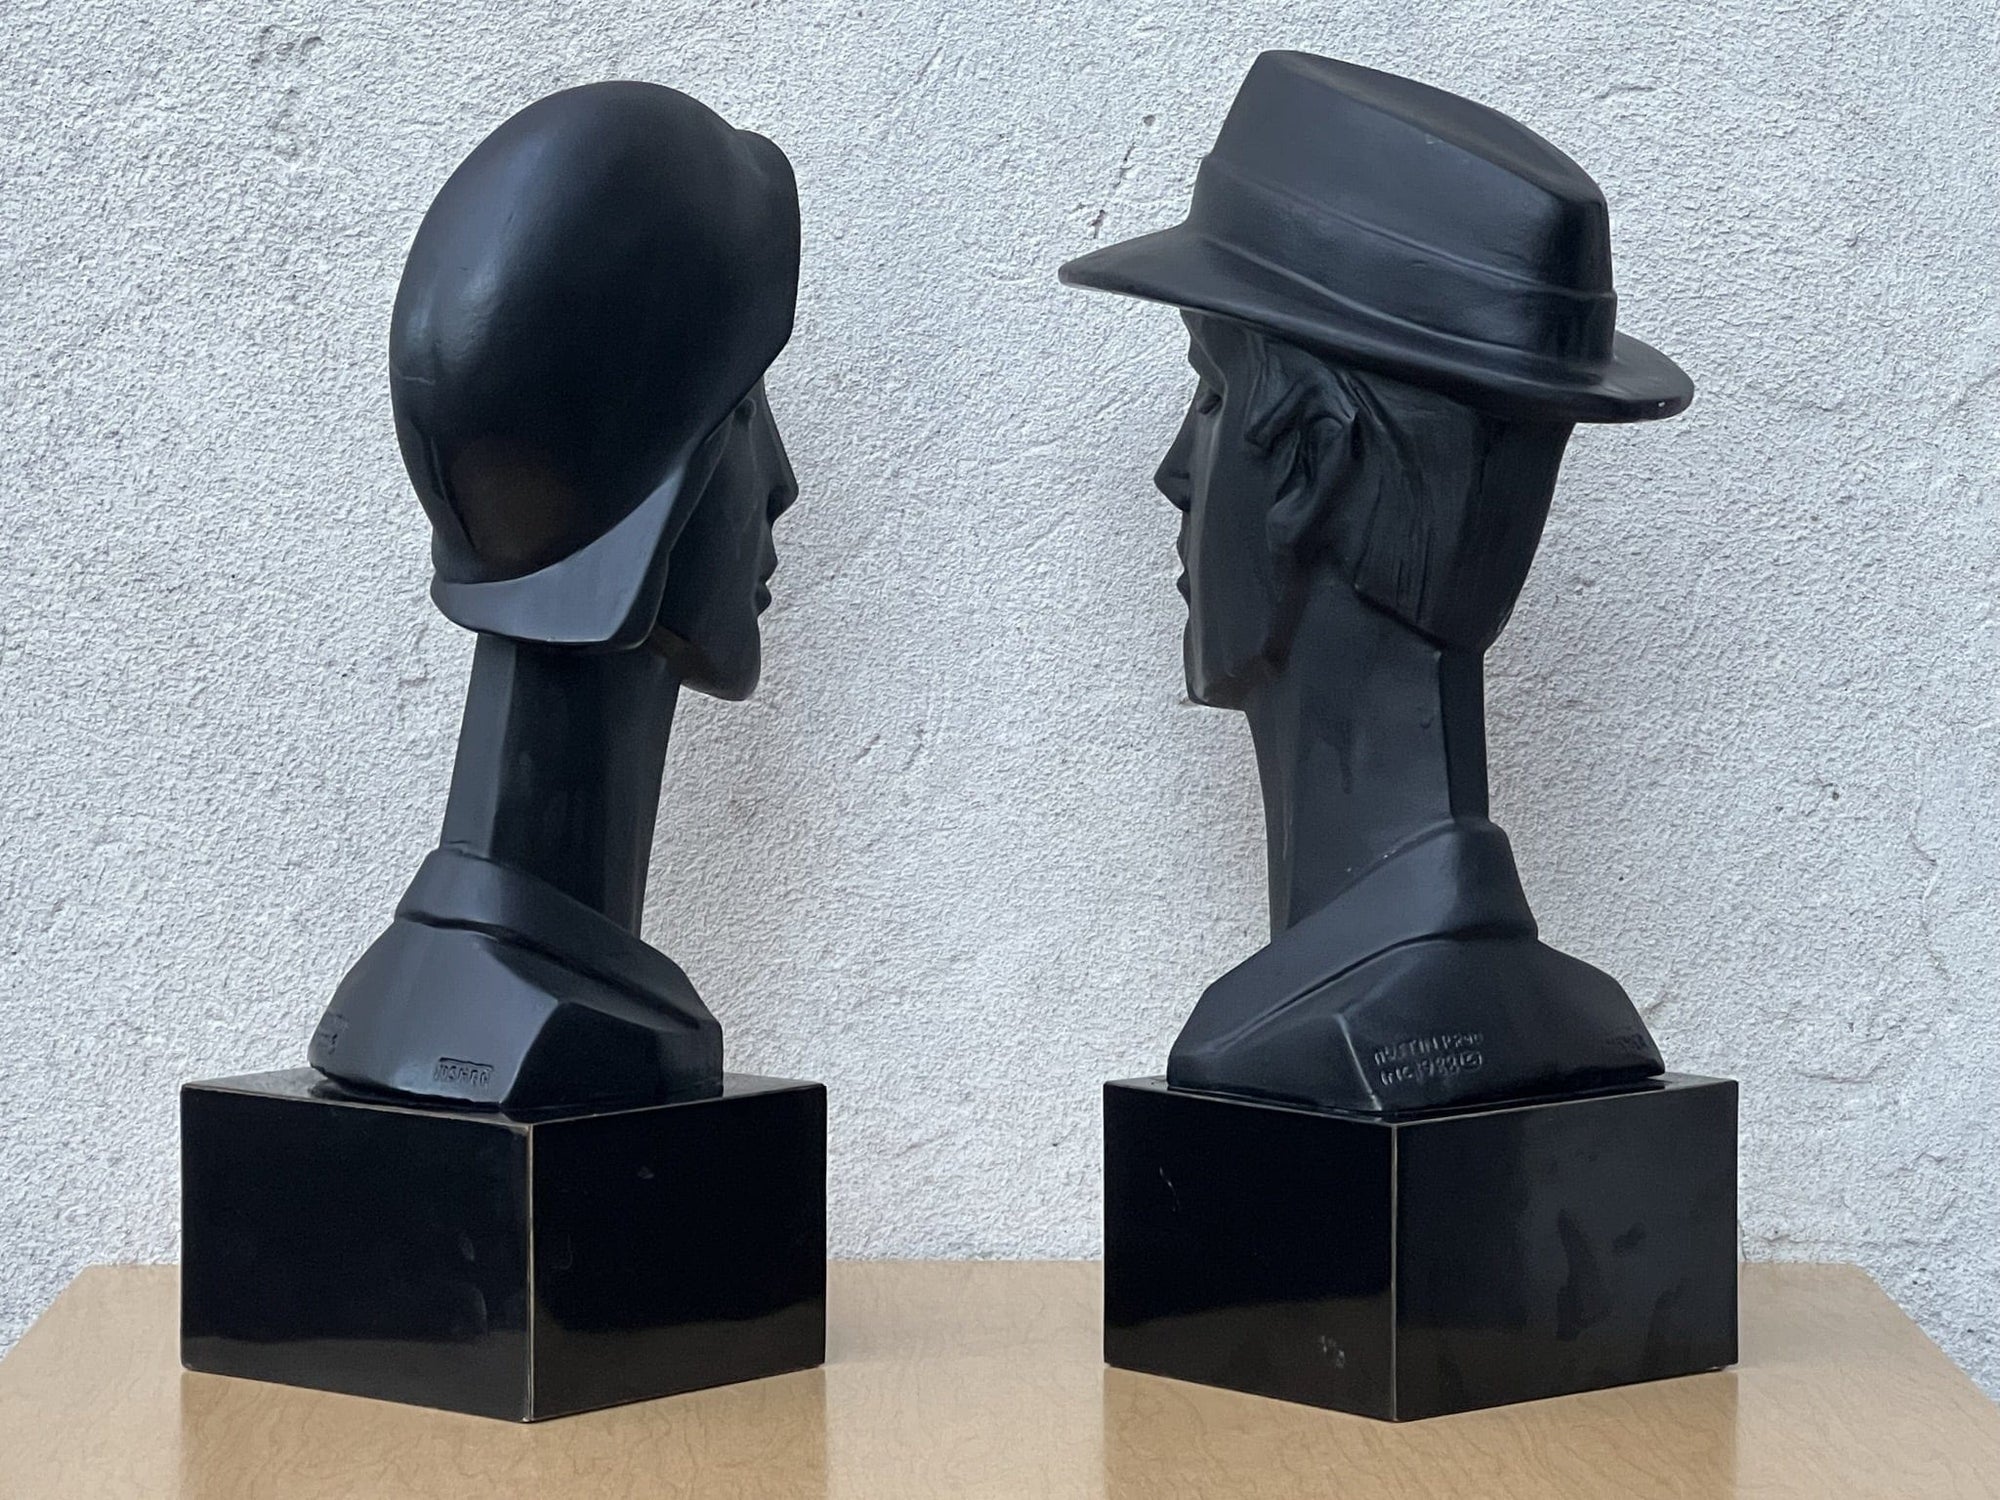 I Like Mike's Mid Century Modern Wall Decor & Art Neo Deco Pair Black Ceramic Man & Woman by David Fisher for Austin Productions, 1988